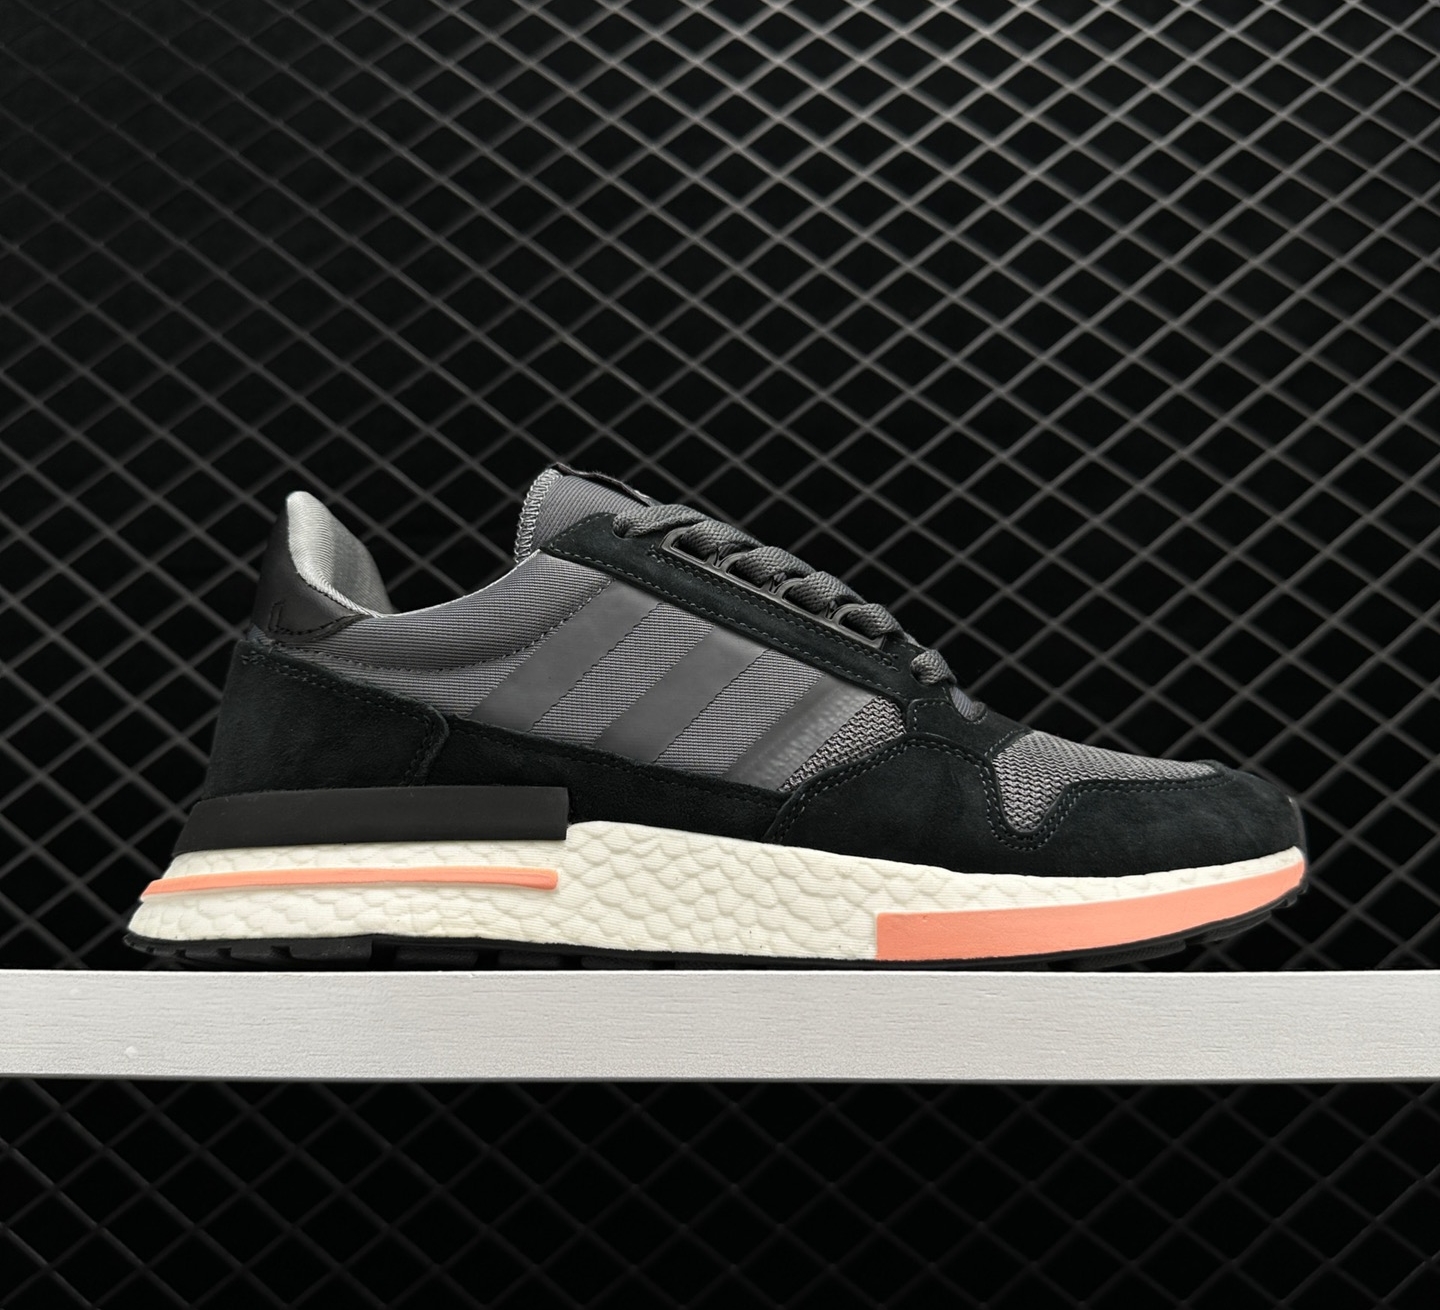 Adidas ZX 500 RM Gray White Pink B42217 - Stylish and Comfortable Footwear